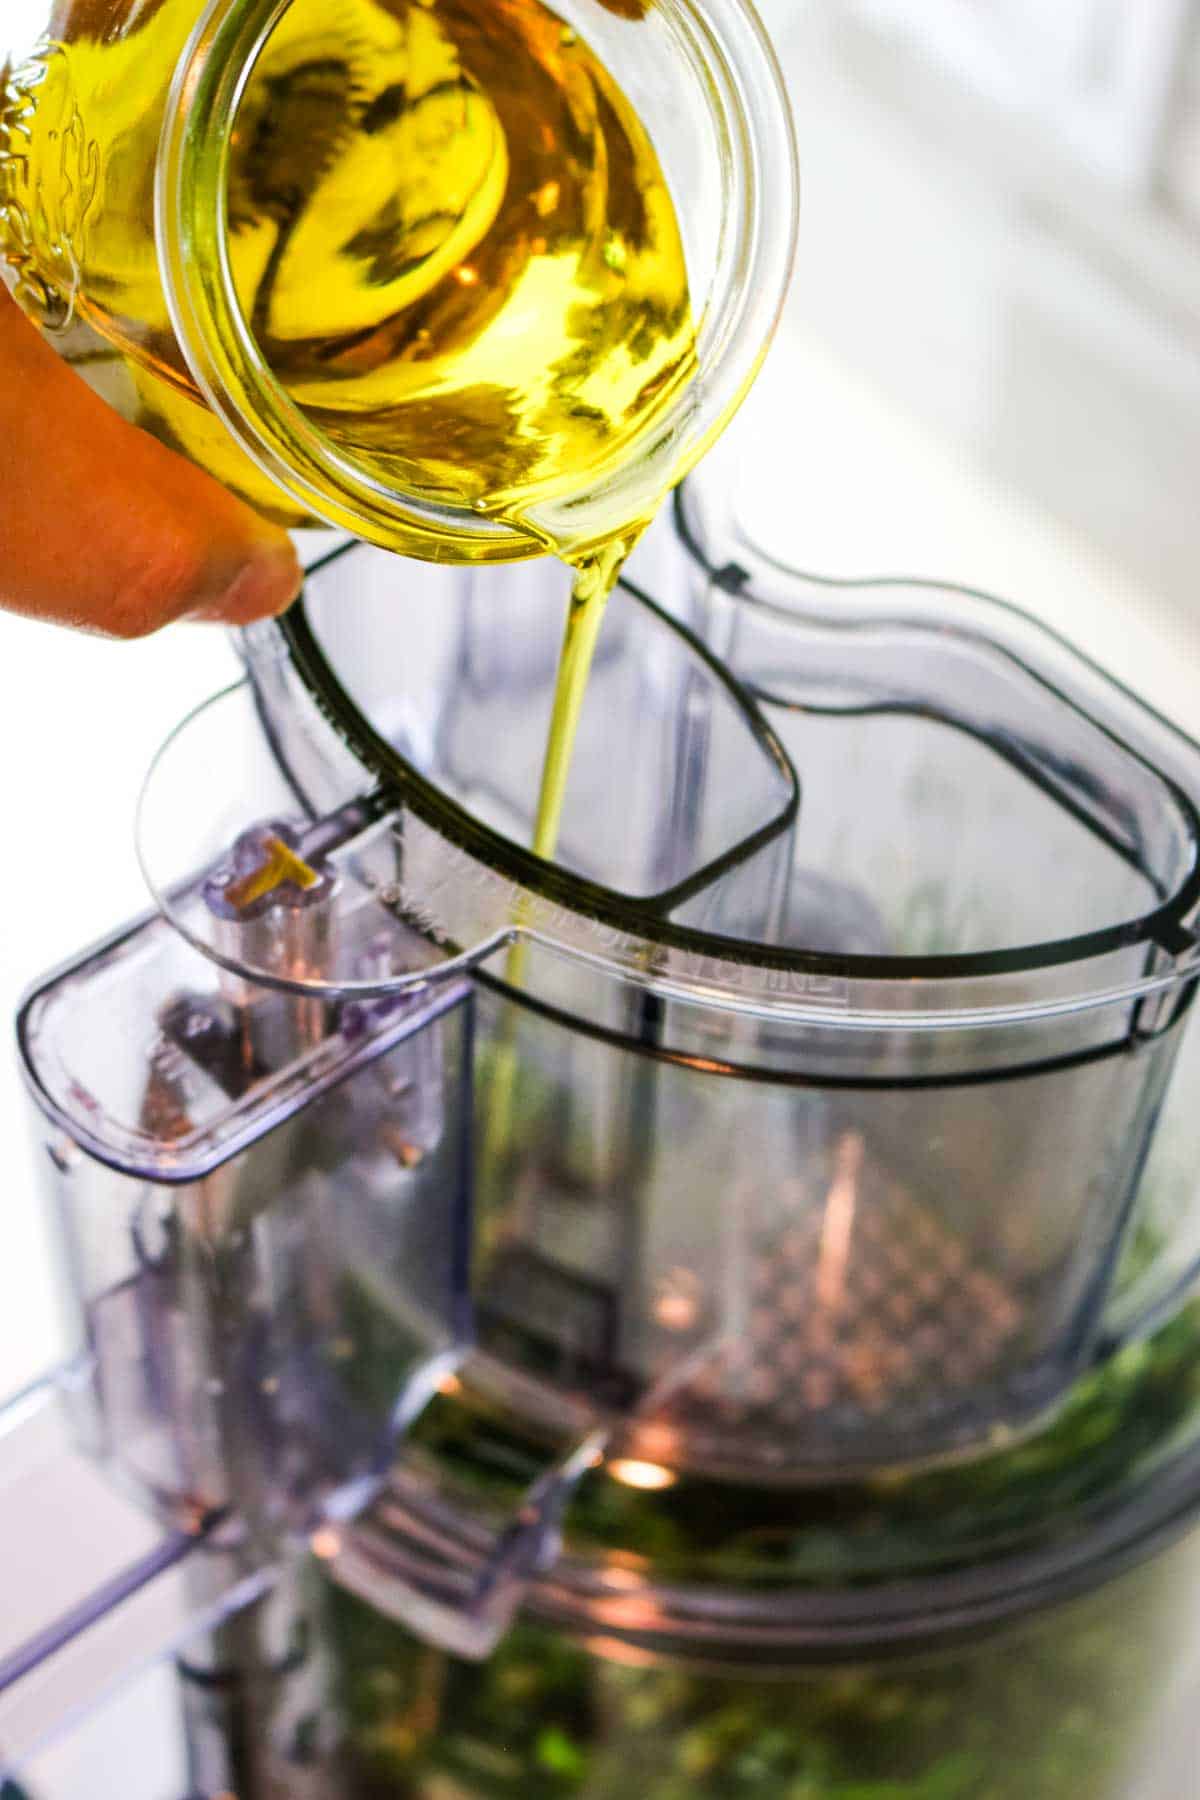 olive oil being poured in stream into food processor chute